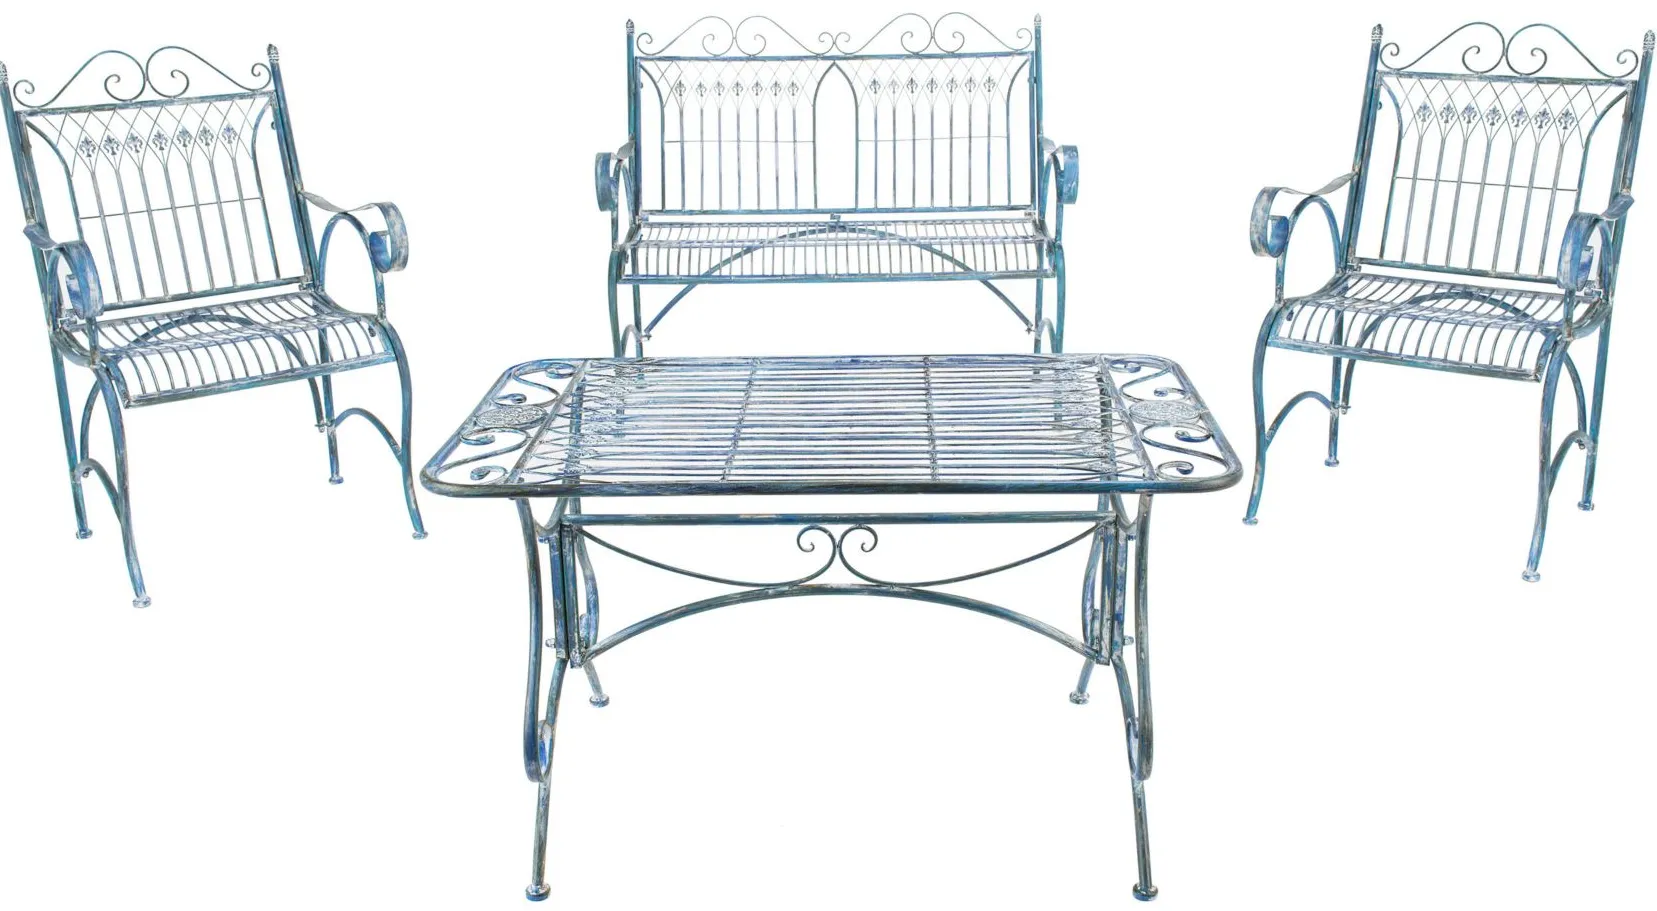 Werner 4-pc. Patio Set in Hunter Green by Safavieh